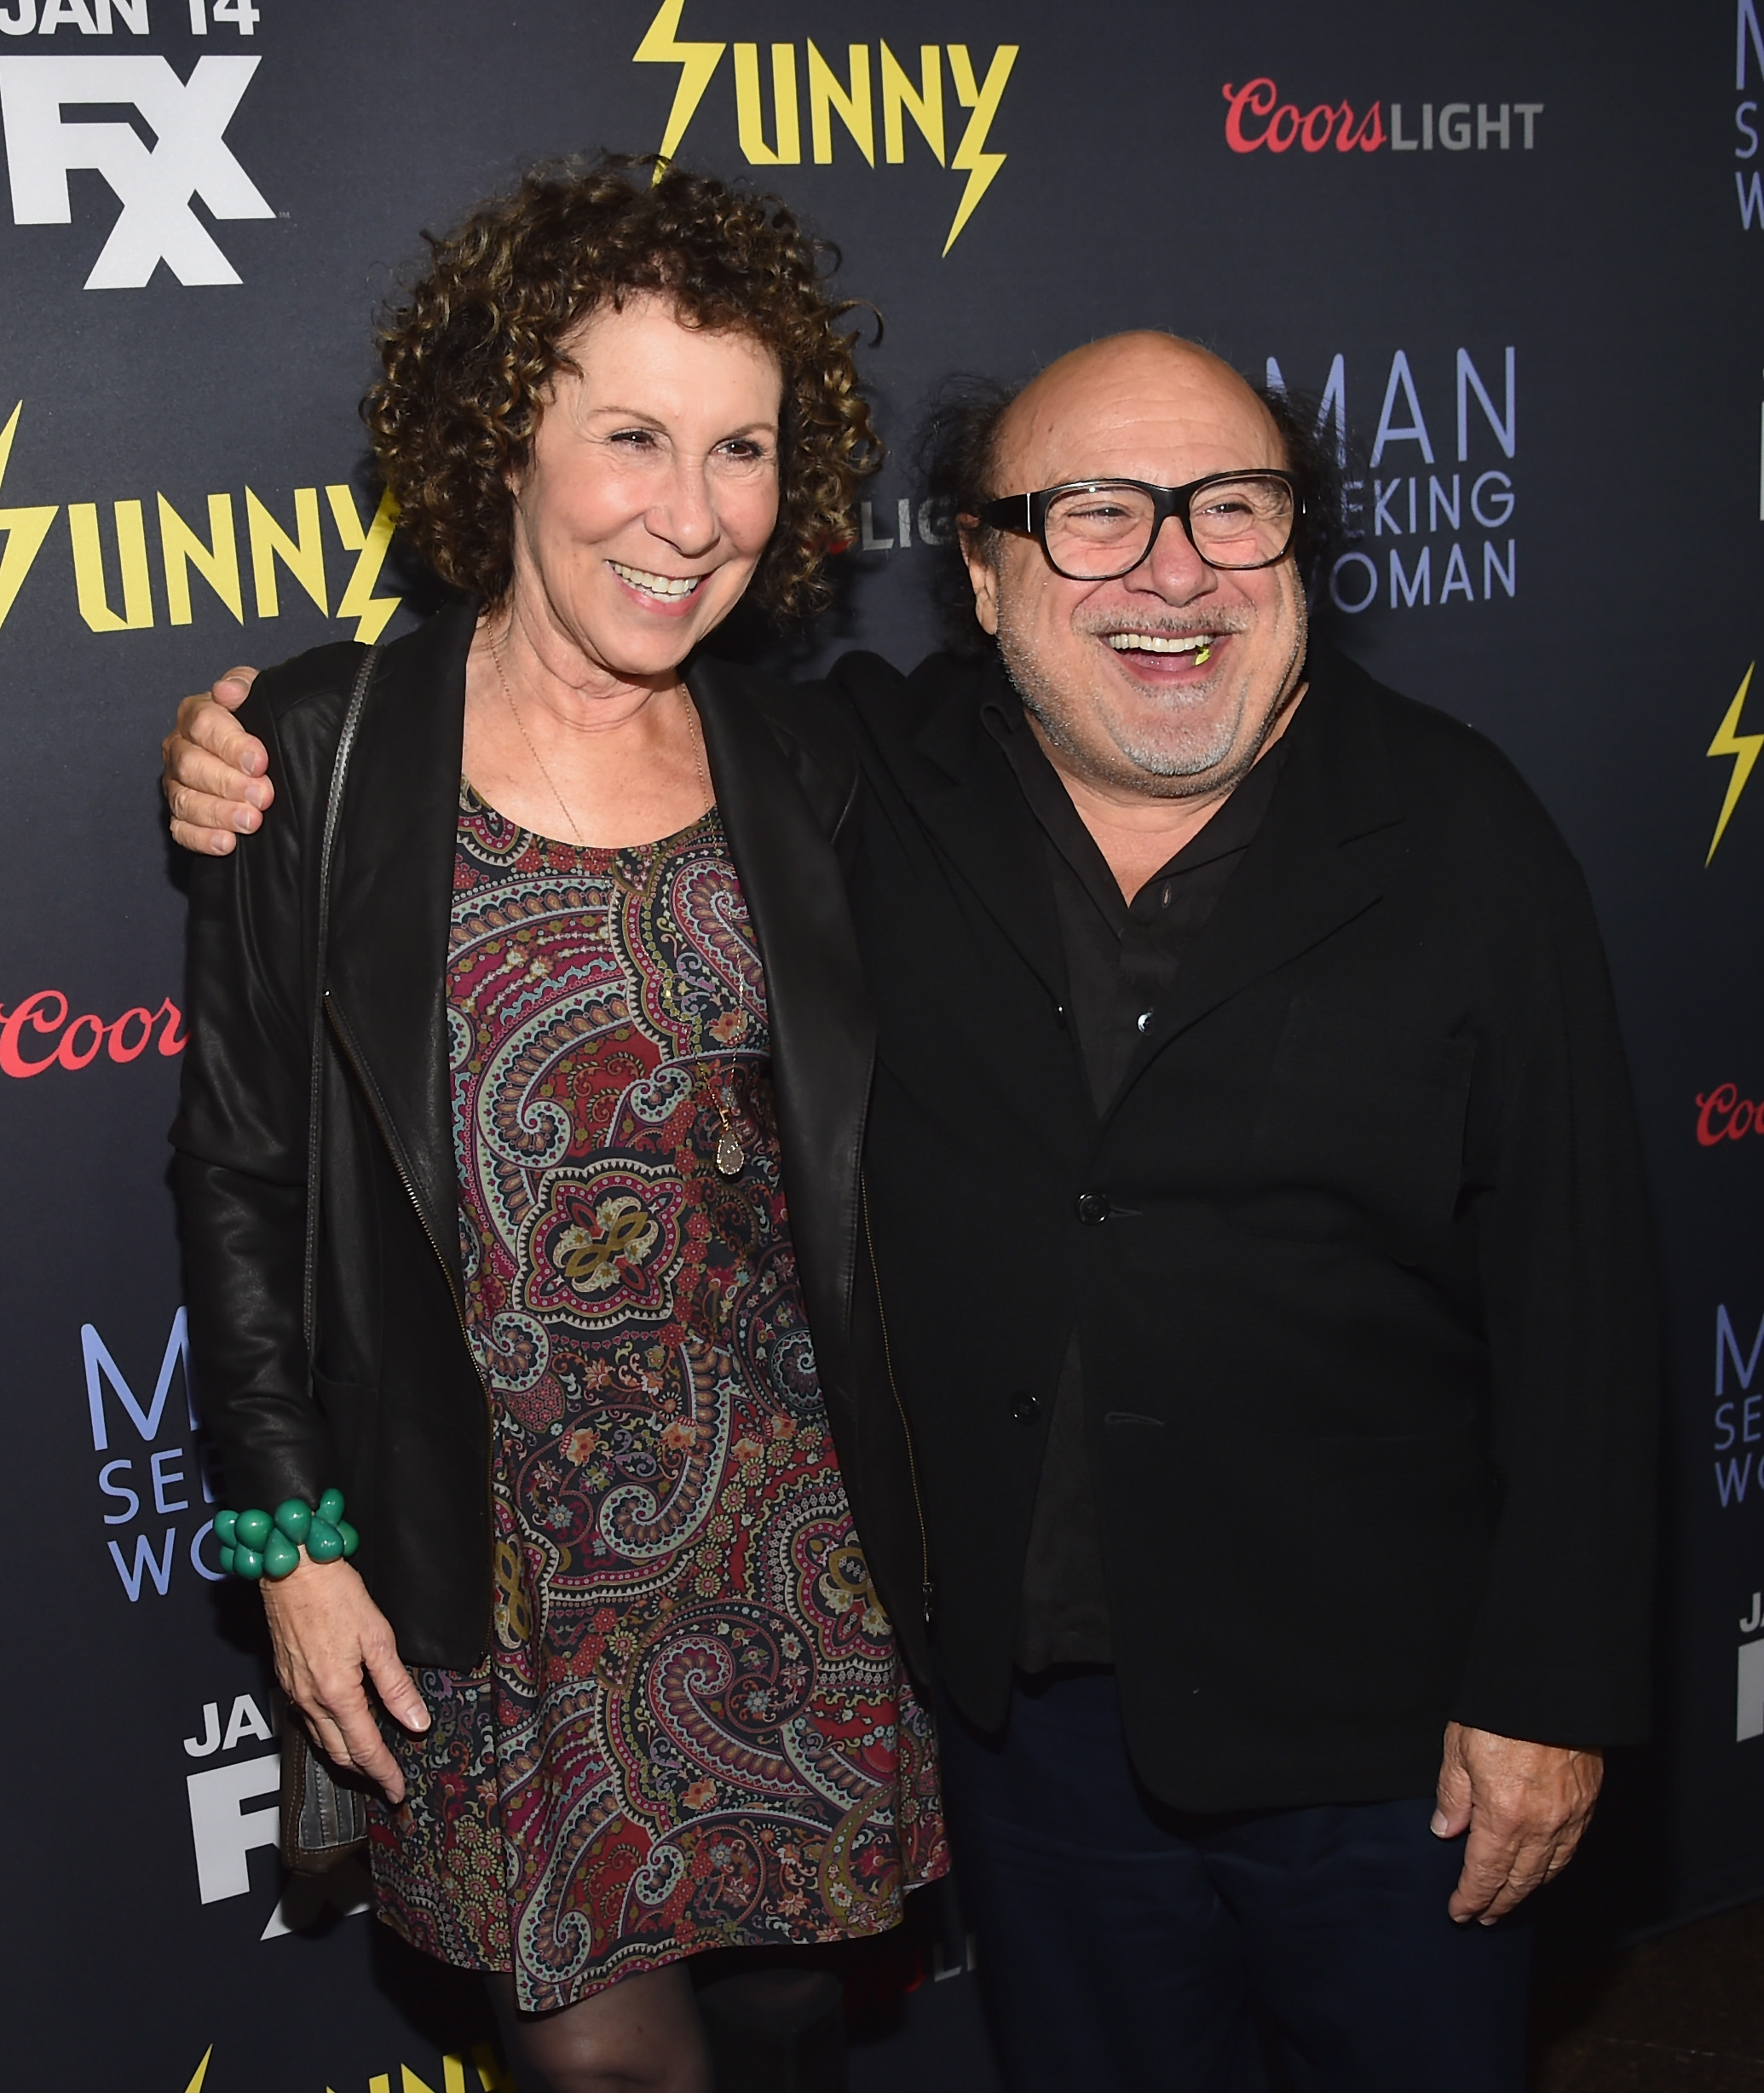 Rhea Perlman and Danny DeVito at the premiere of "Man Seeking Woman" in Los Angeles, California on January 13, 2015 | Source: Getty Images